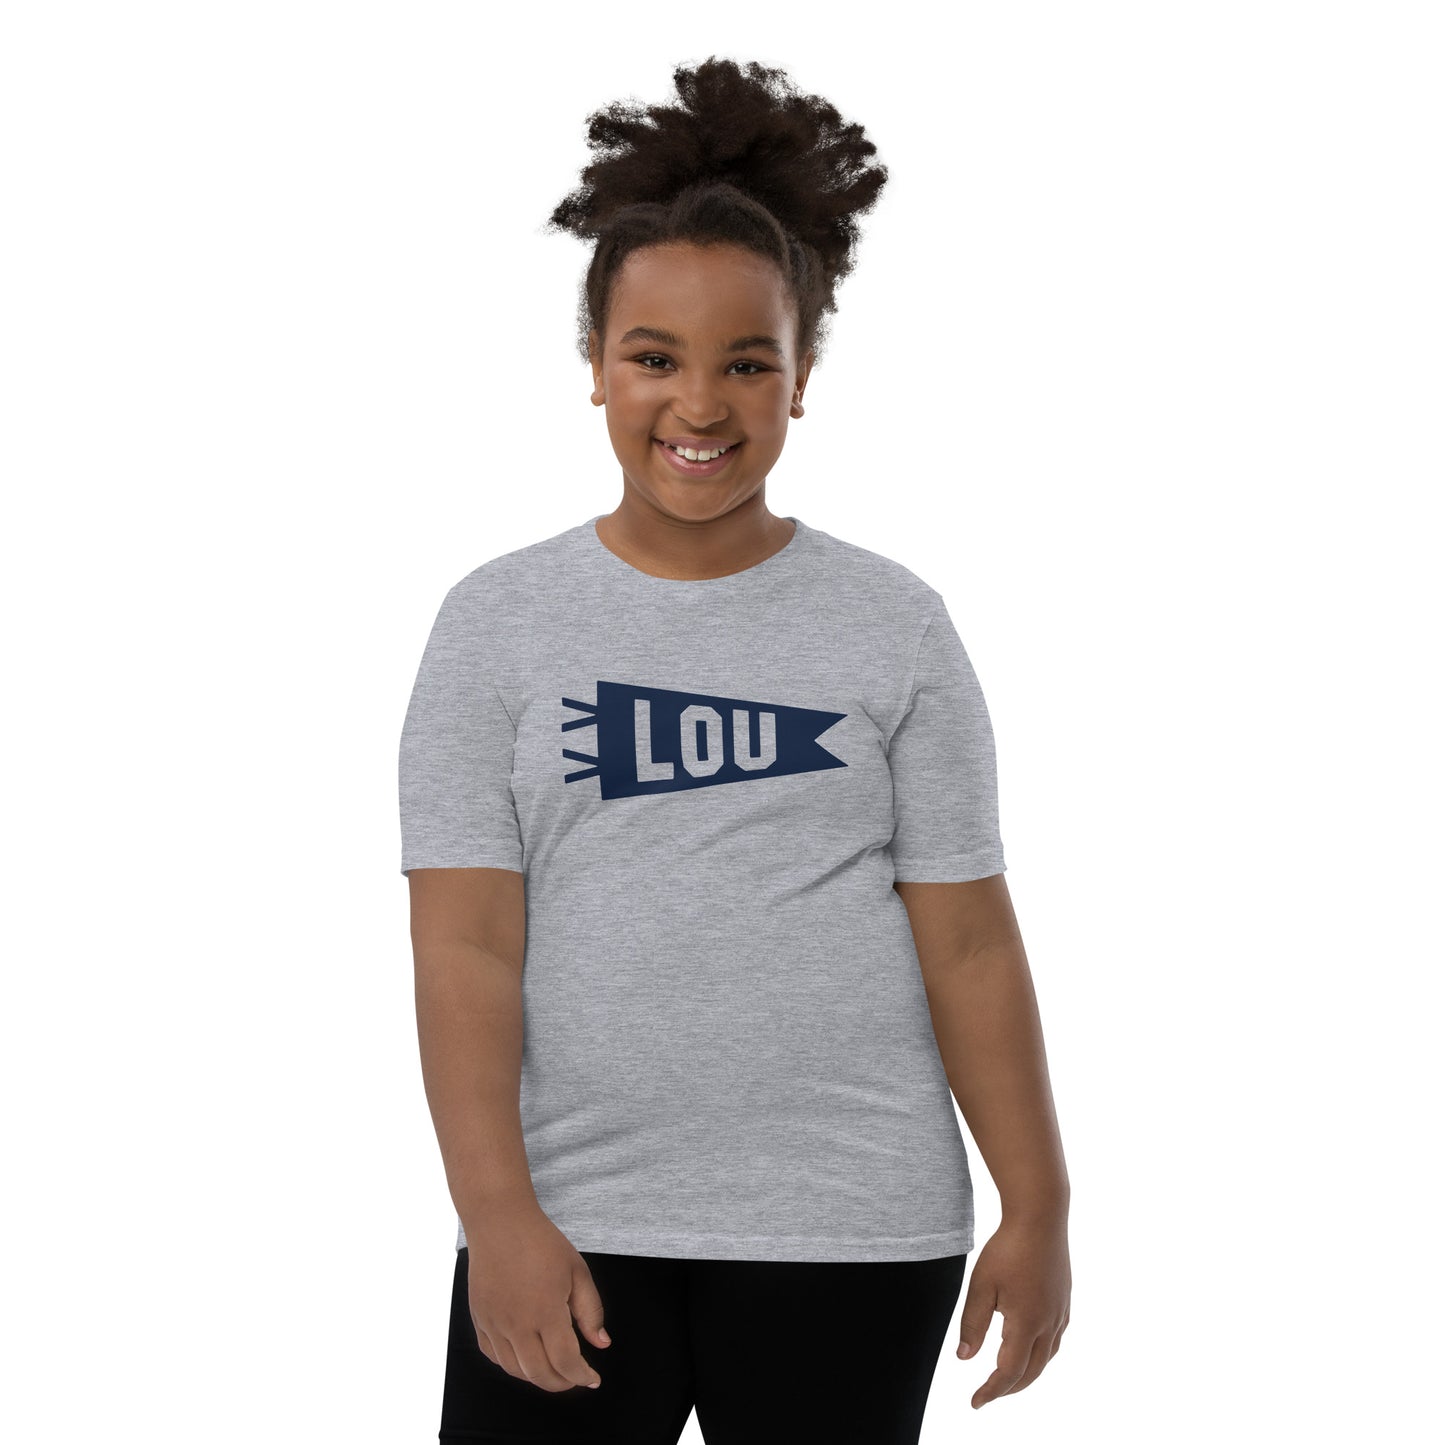 Kid's Airport Code Tee - Navy Blue Graphic • LOU Louisville • YHM Designs - Image 05